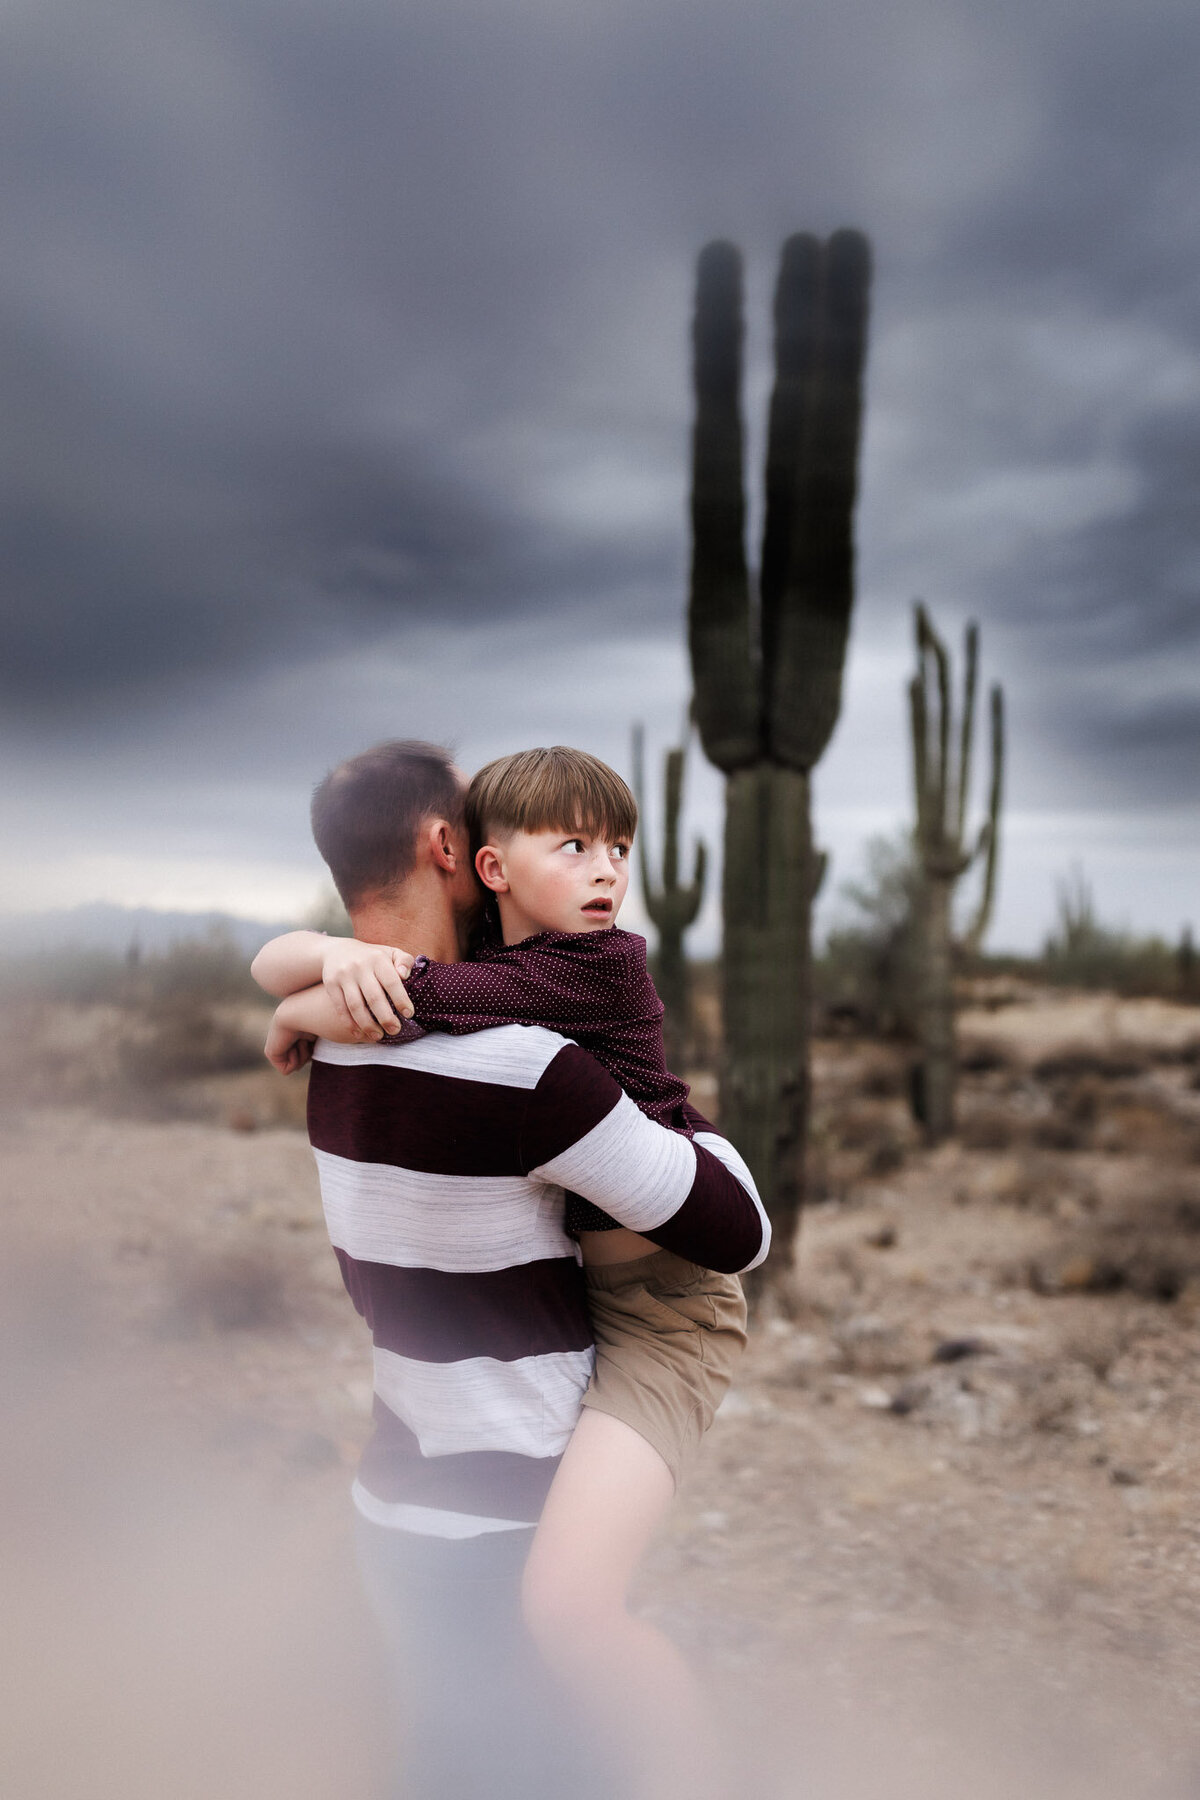 dad holding son in the dessert with cactus